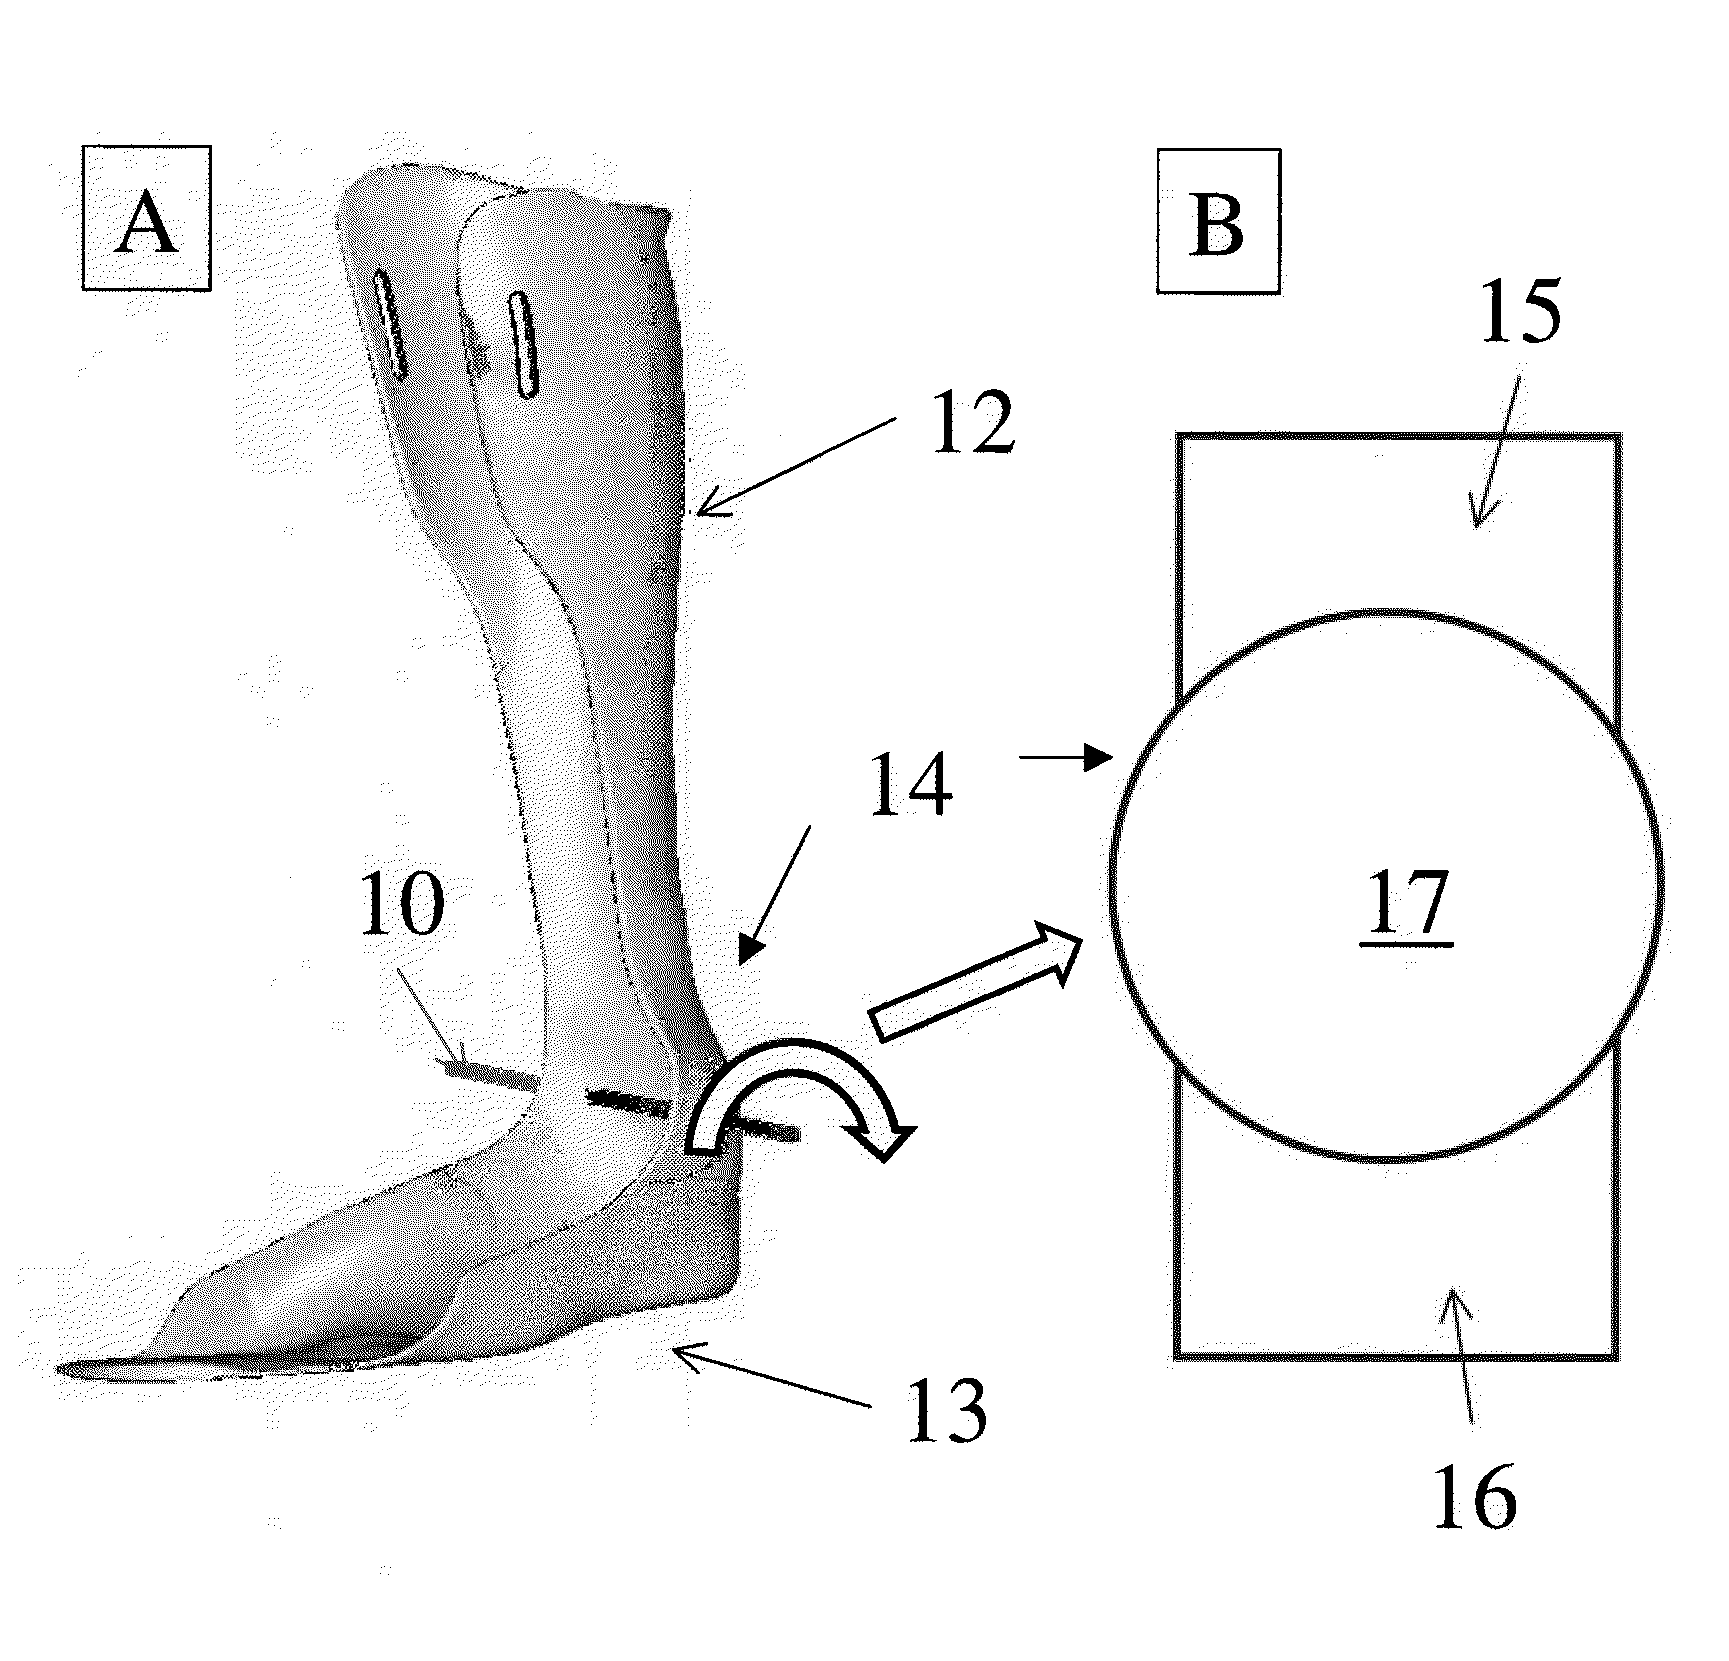 Artificial exoskeleton device or an orthotic device comprising an integrated hinge structure